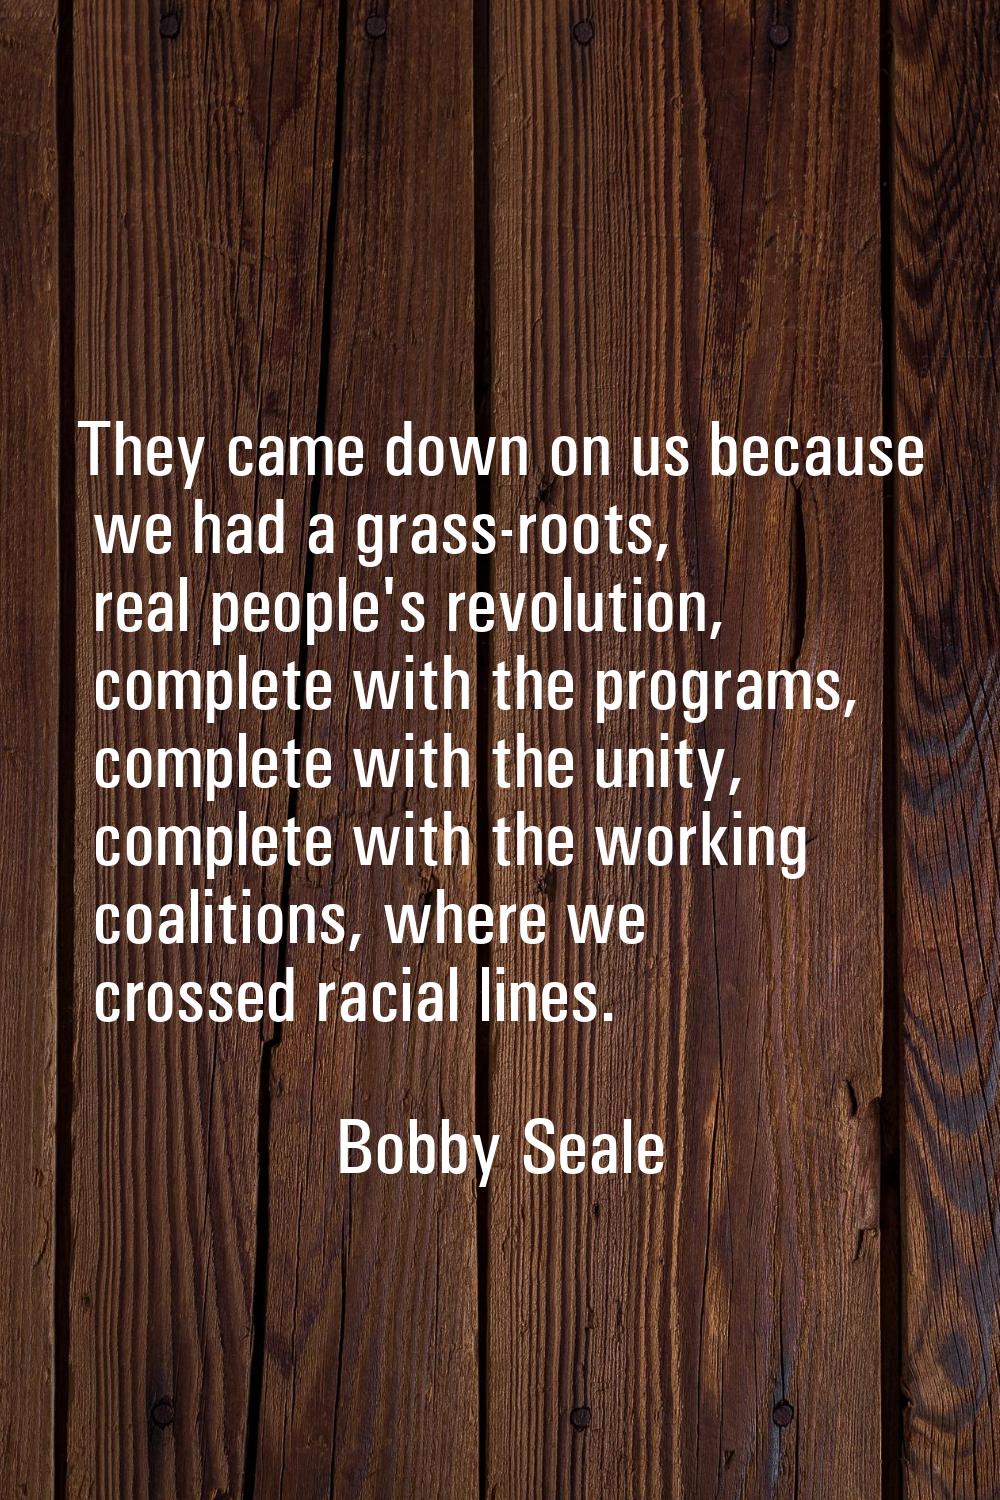 They came down on us because we had a grass-roots, real people's revolution, complete with the prog